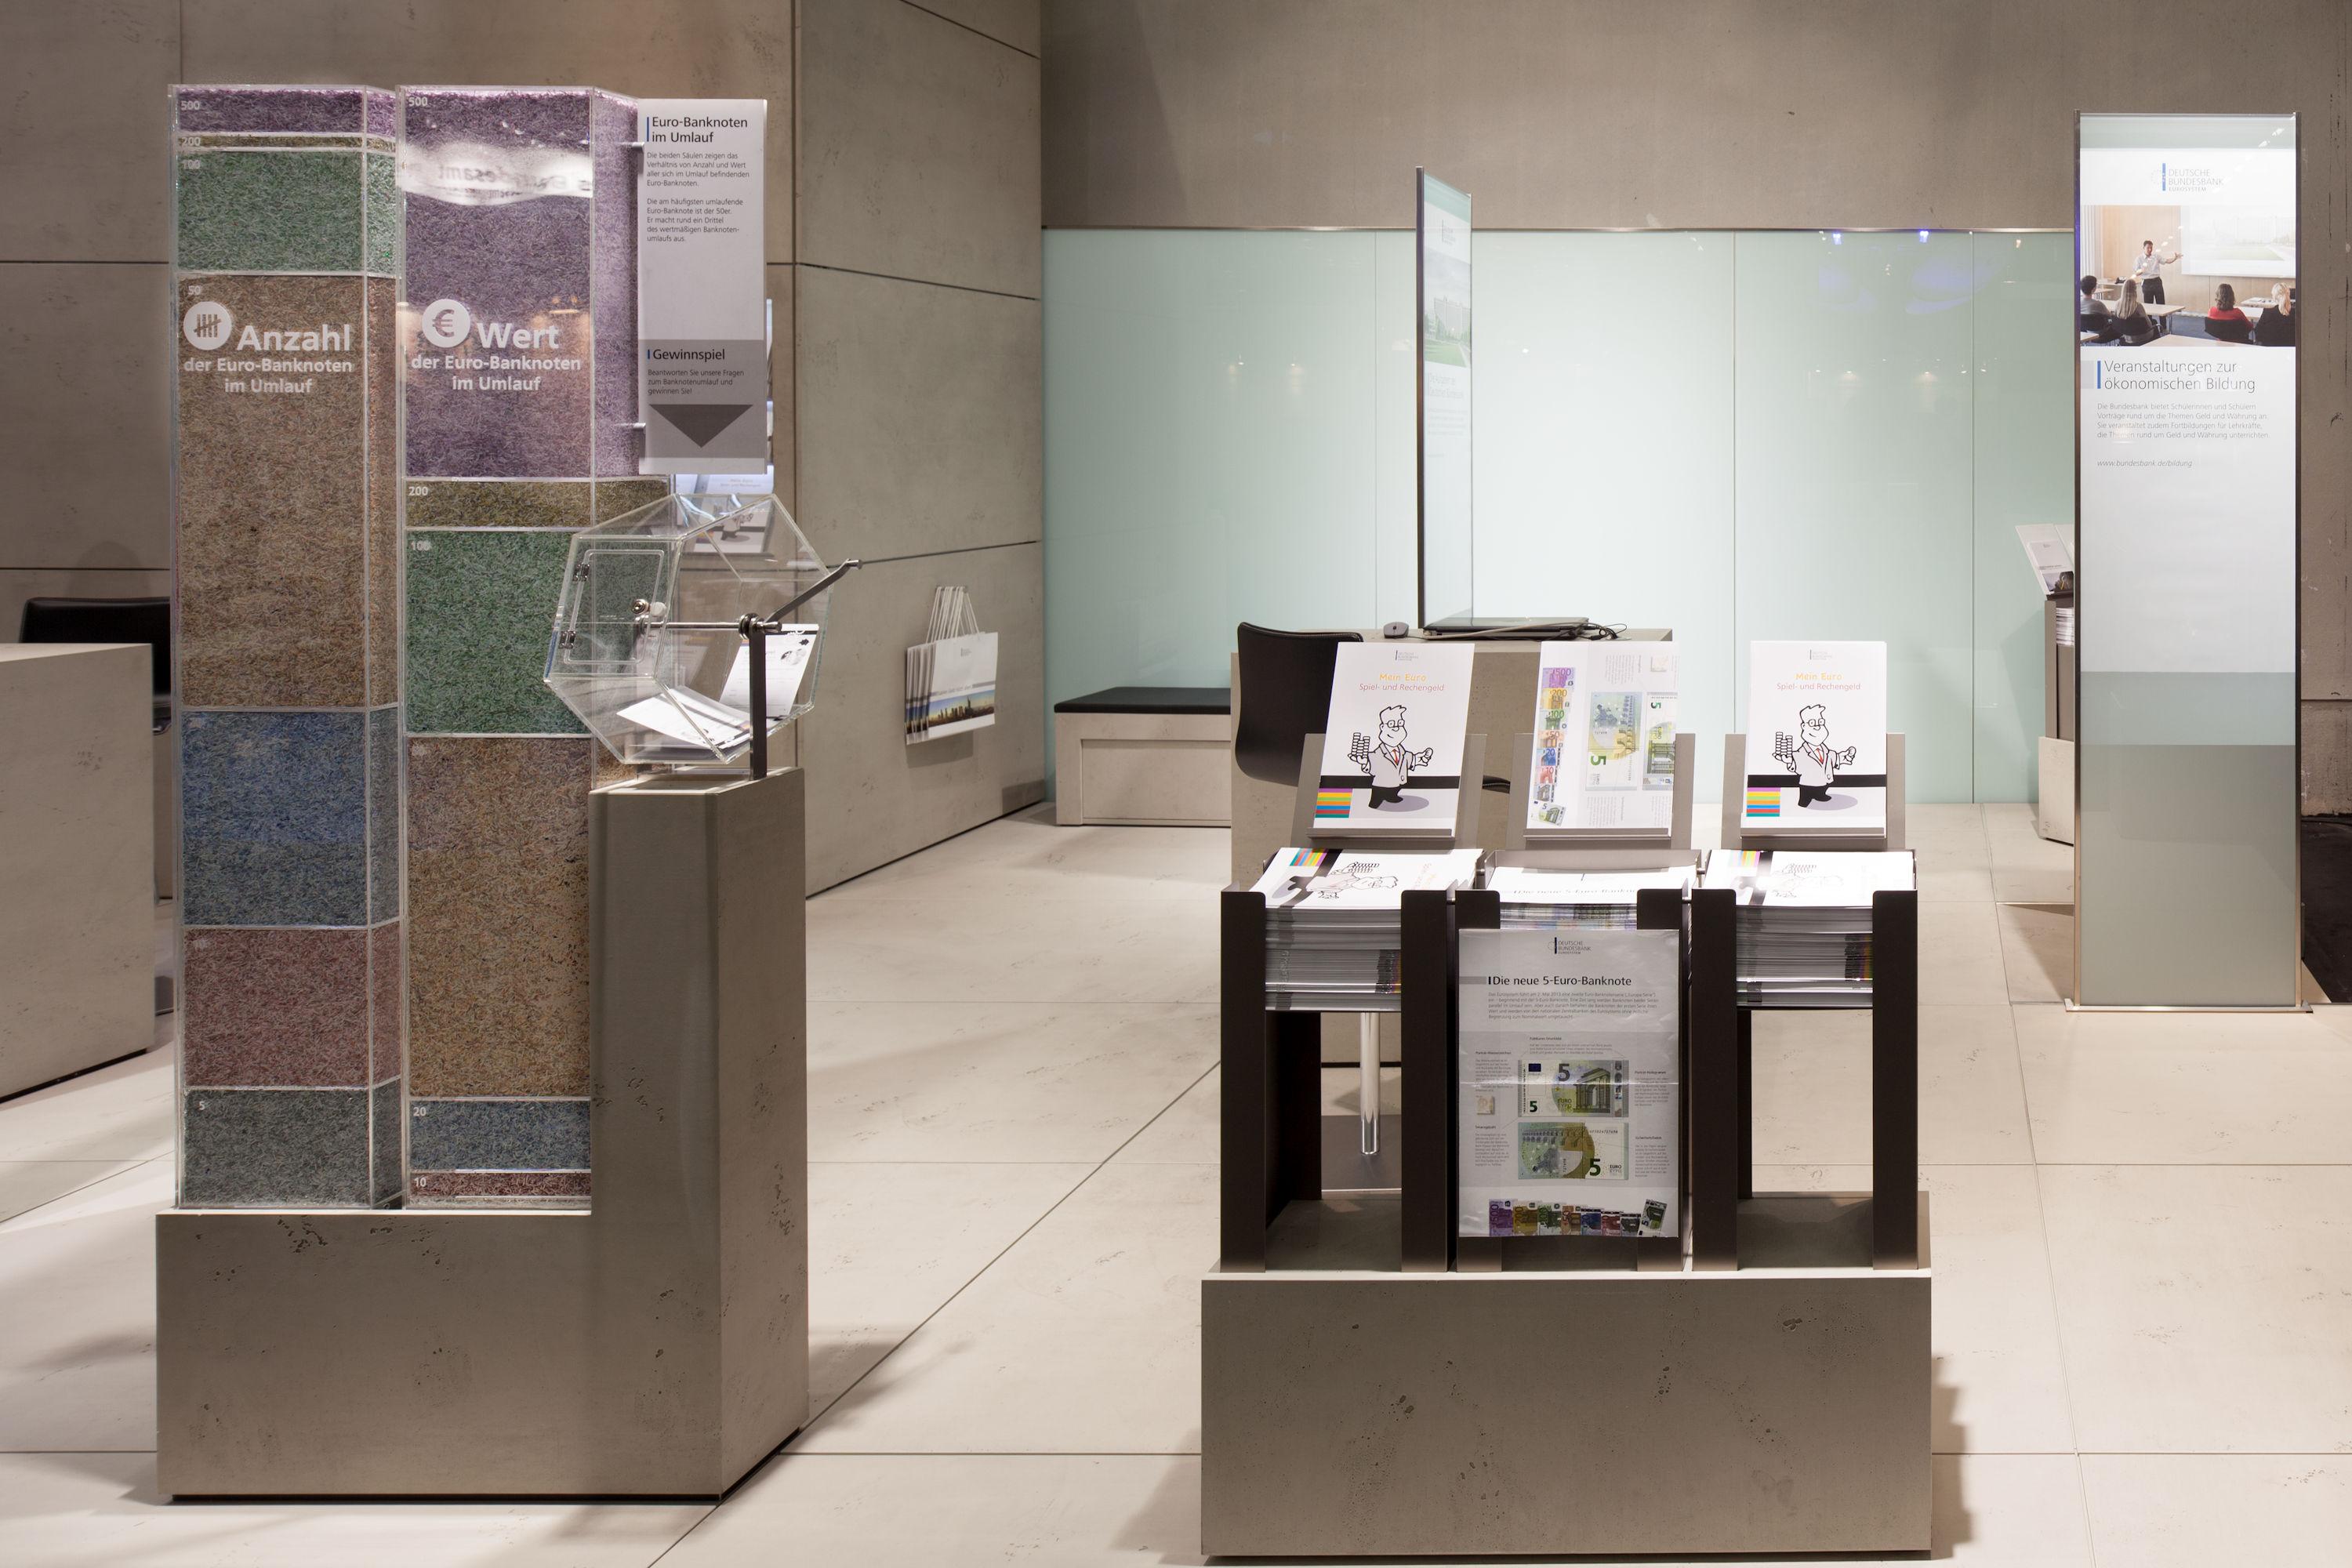 Photo shows the Information stand of the Bundesbank